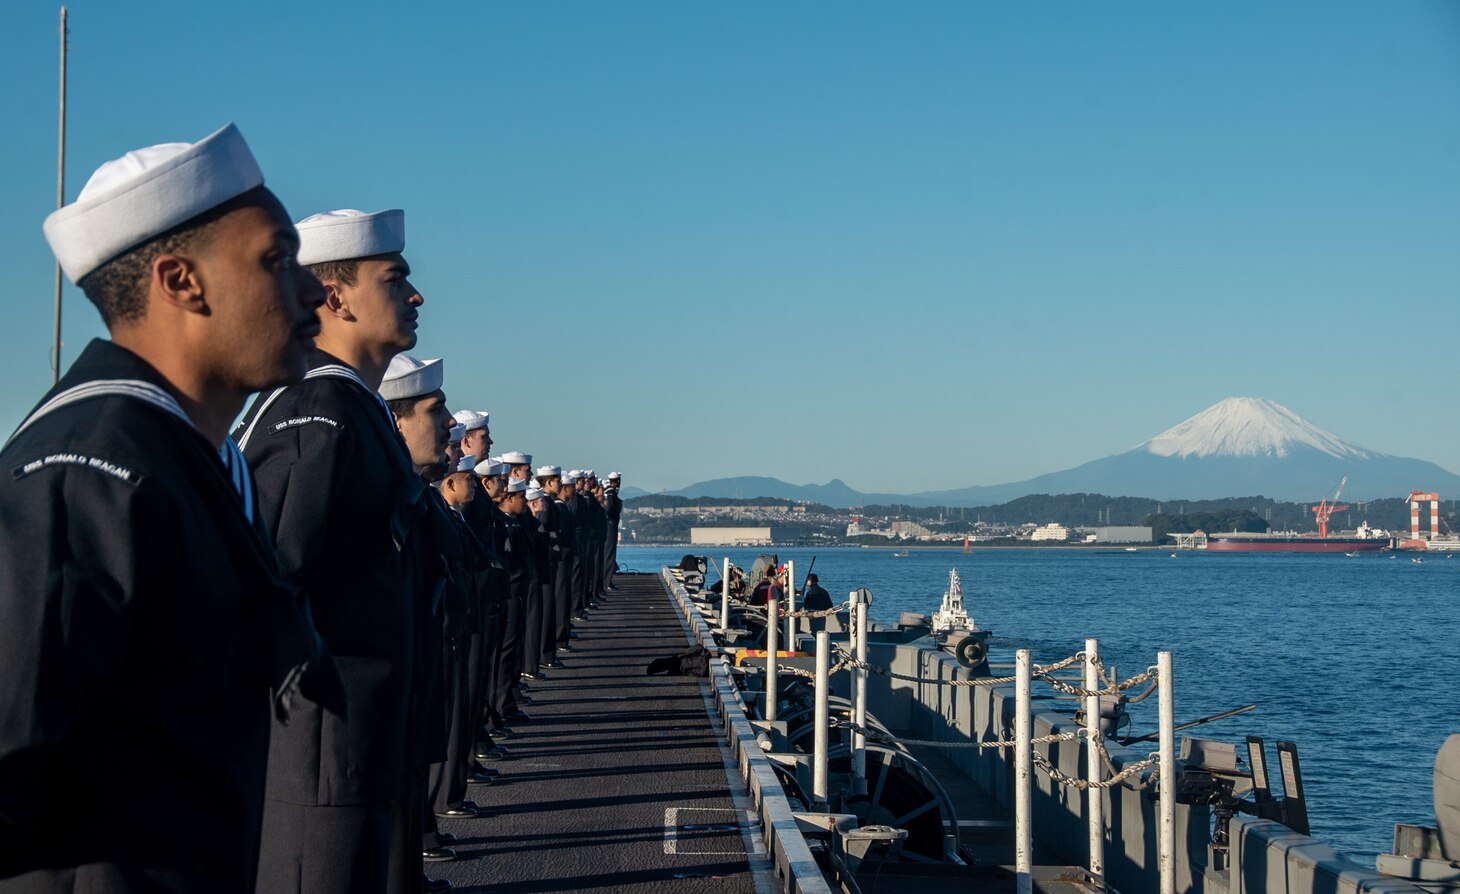 YOKOSUKA, Japan (Nov. 19, 2023) Sailors man the rails on the flight deck as the U.S. Navy’s only forward-deployed aircraft carrier, USS Ronald Reagan (CVN 76), returns to Commander, Fleet Activities Yokosuka, Japan, following a six-month deployment in the Indo-Pacific region, Nov. 19. During Ronald Reagan’s deployment, the ship conducted multinational exercises with the Japan Maritime Self-Defense Force (JMSDF), Royal Australian Navy, Indonesian Navy, and Republic of Korea Navy, a multi-large deck event with USS Carl Vinson (CVN 70), Carrier Strike Group 1, and JMSDF first-in-class helicopter destroyer, JS Hyuga (DDH 181), and visited Vietnam, Republic of Korea, and the Philippines. Ronald Reagan, the flagship of Carrier Strike Group 5, provides a combat-ready force that protects and defends the United States, and supports alliances, partnerships and collective maritime interests in the Indo-Pacific region. (U.S. Navy photo by Mass Communication Specialist 3rd Class Heather McGee)